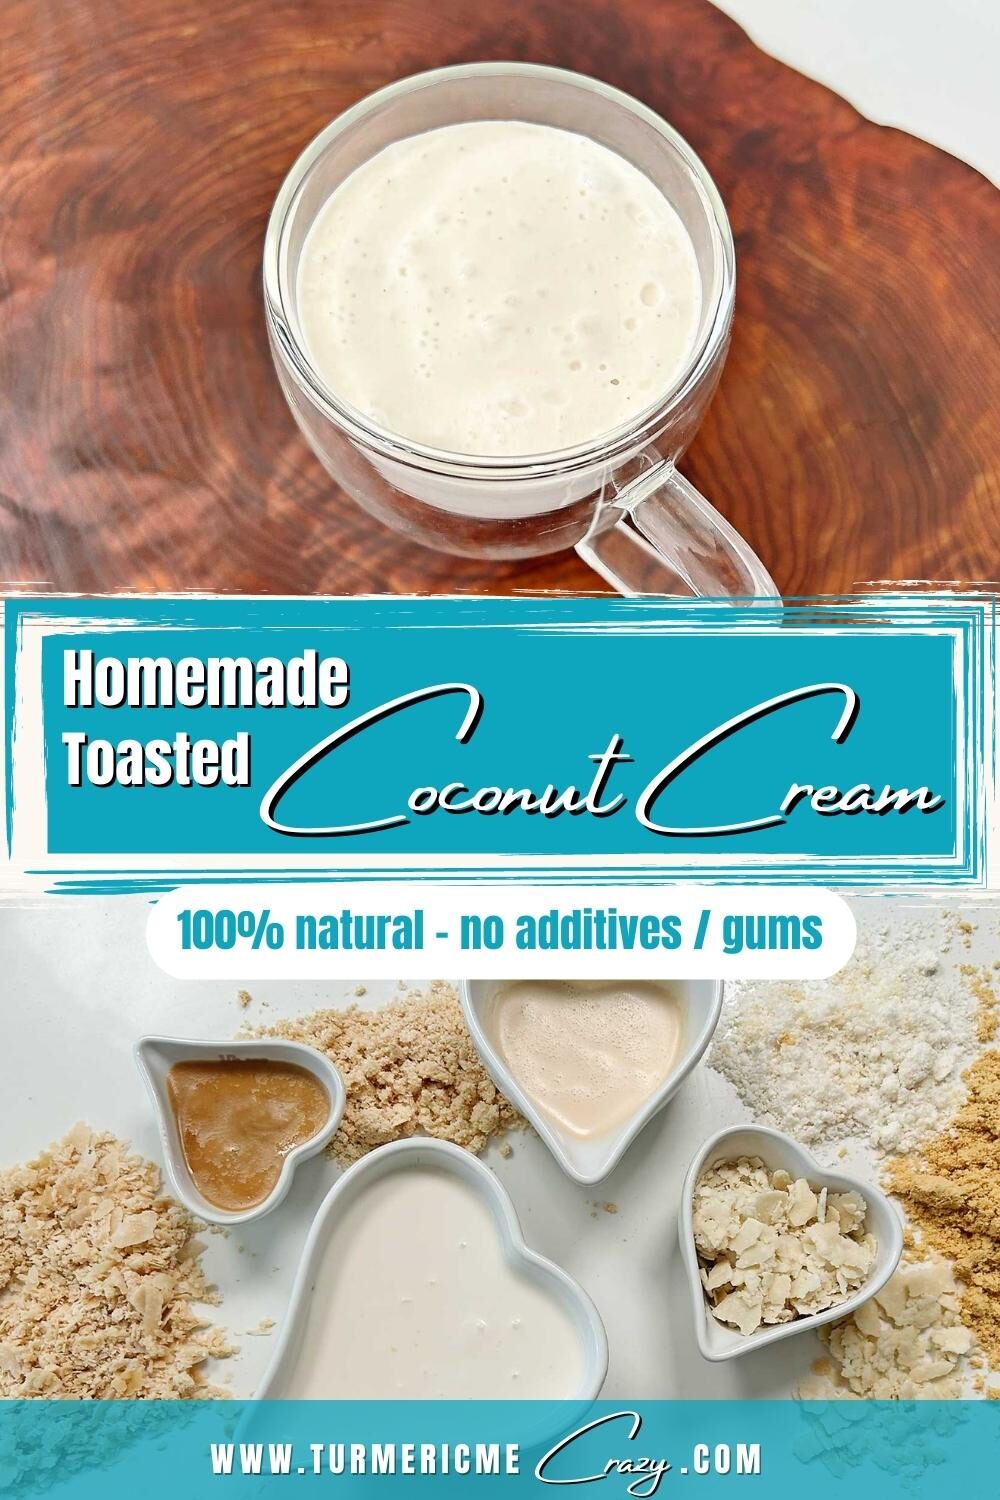 Easily make your own incredibly creamy & delicious coconut cream, a lovely plant based cream, in 3 simple steps from just organic shredded coconut! Let us show you how! It's 100% natural coconut cream with no additives, preservatives, emulsifiers or gums! Give it a try and I promise, you'll never buy store bought again!